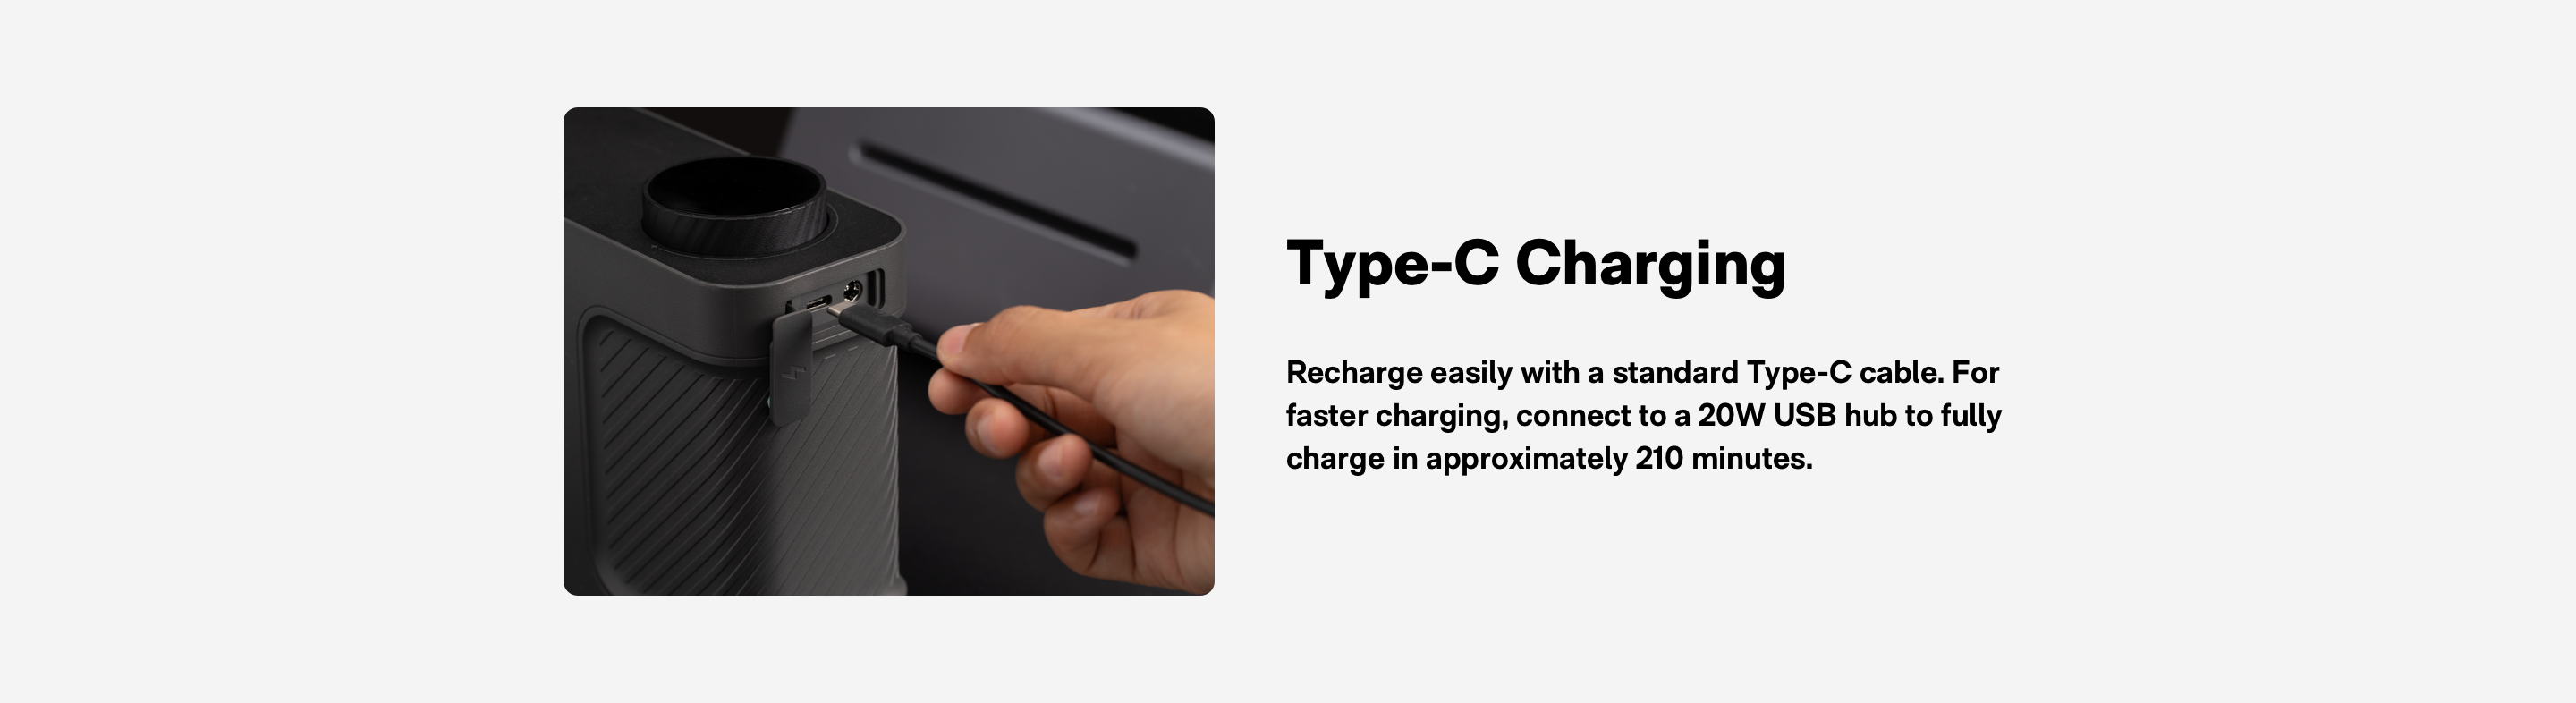 Type-C Charging: Recharge easily with a standard Type-C cable. For faster charging, connect to a 20w USB hub to fully charge in approximately 0 minutes.